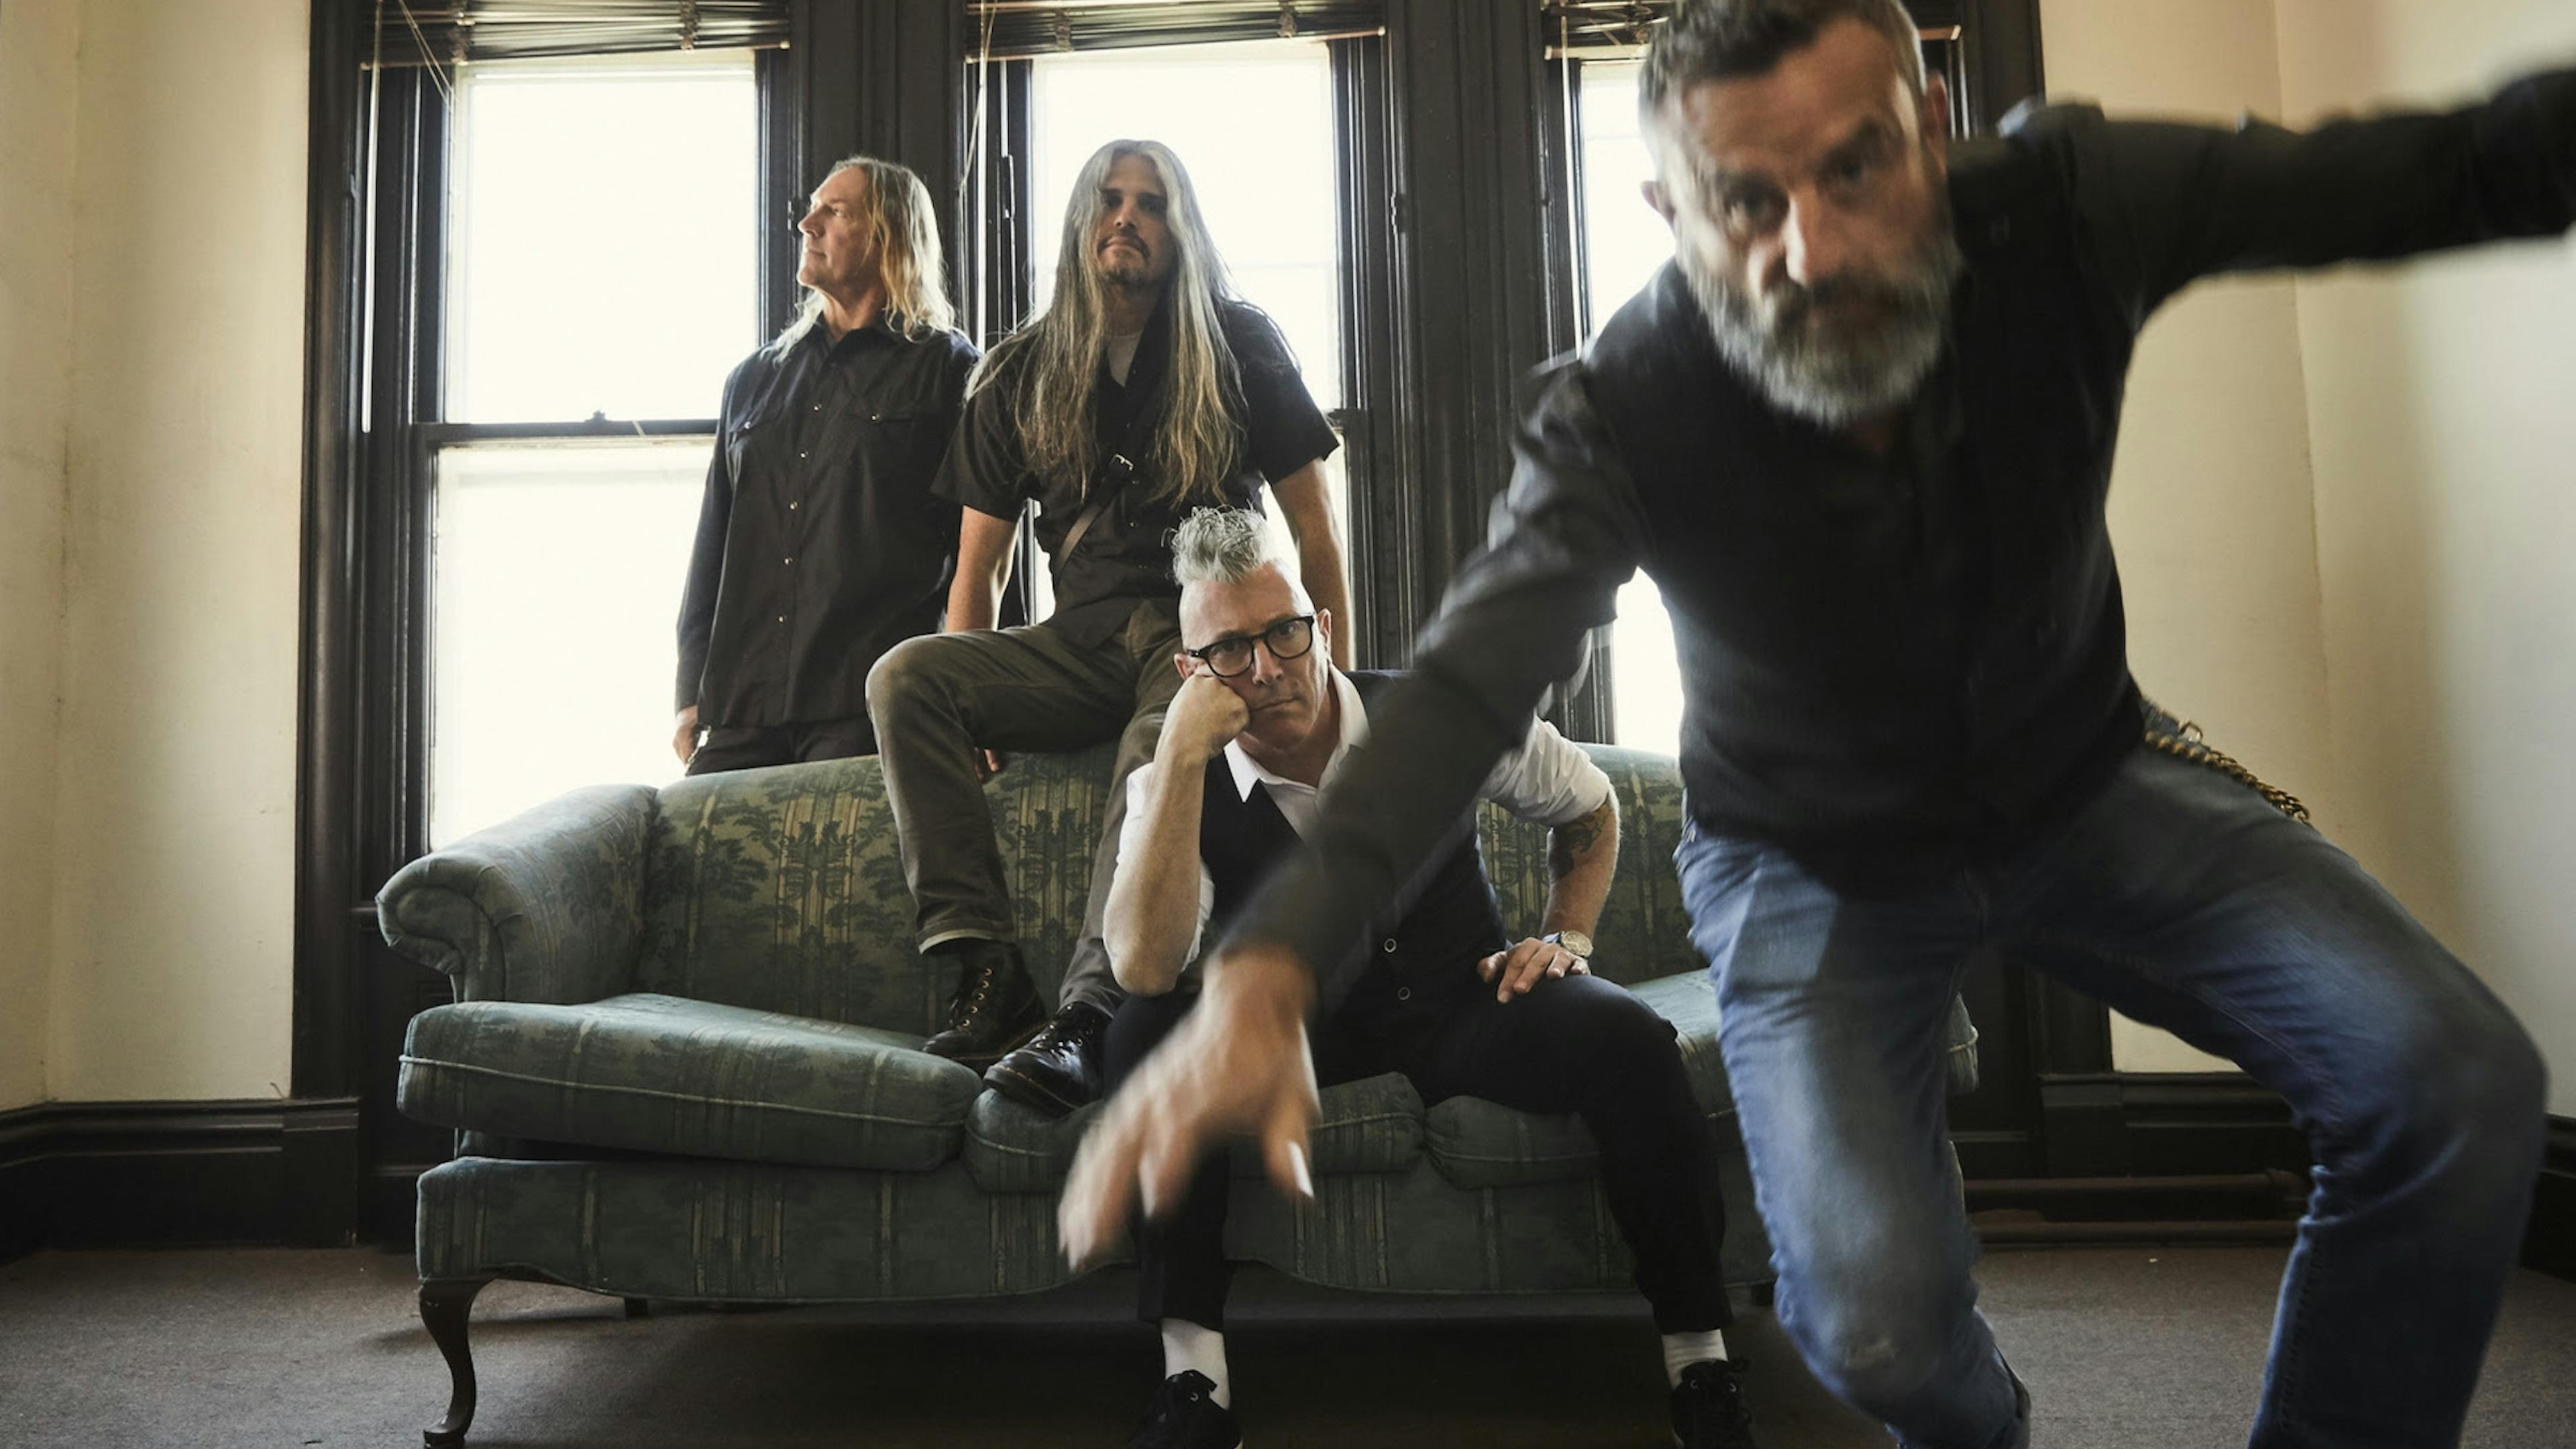 Tool’s Justin Chancellor Gave a Struggling Fan A Free Ticket to Their Show